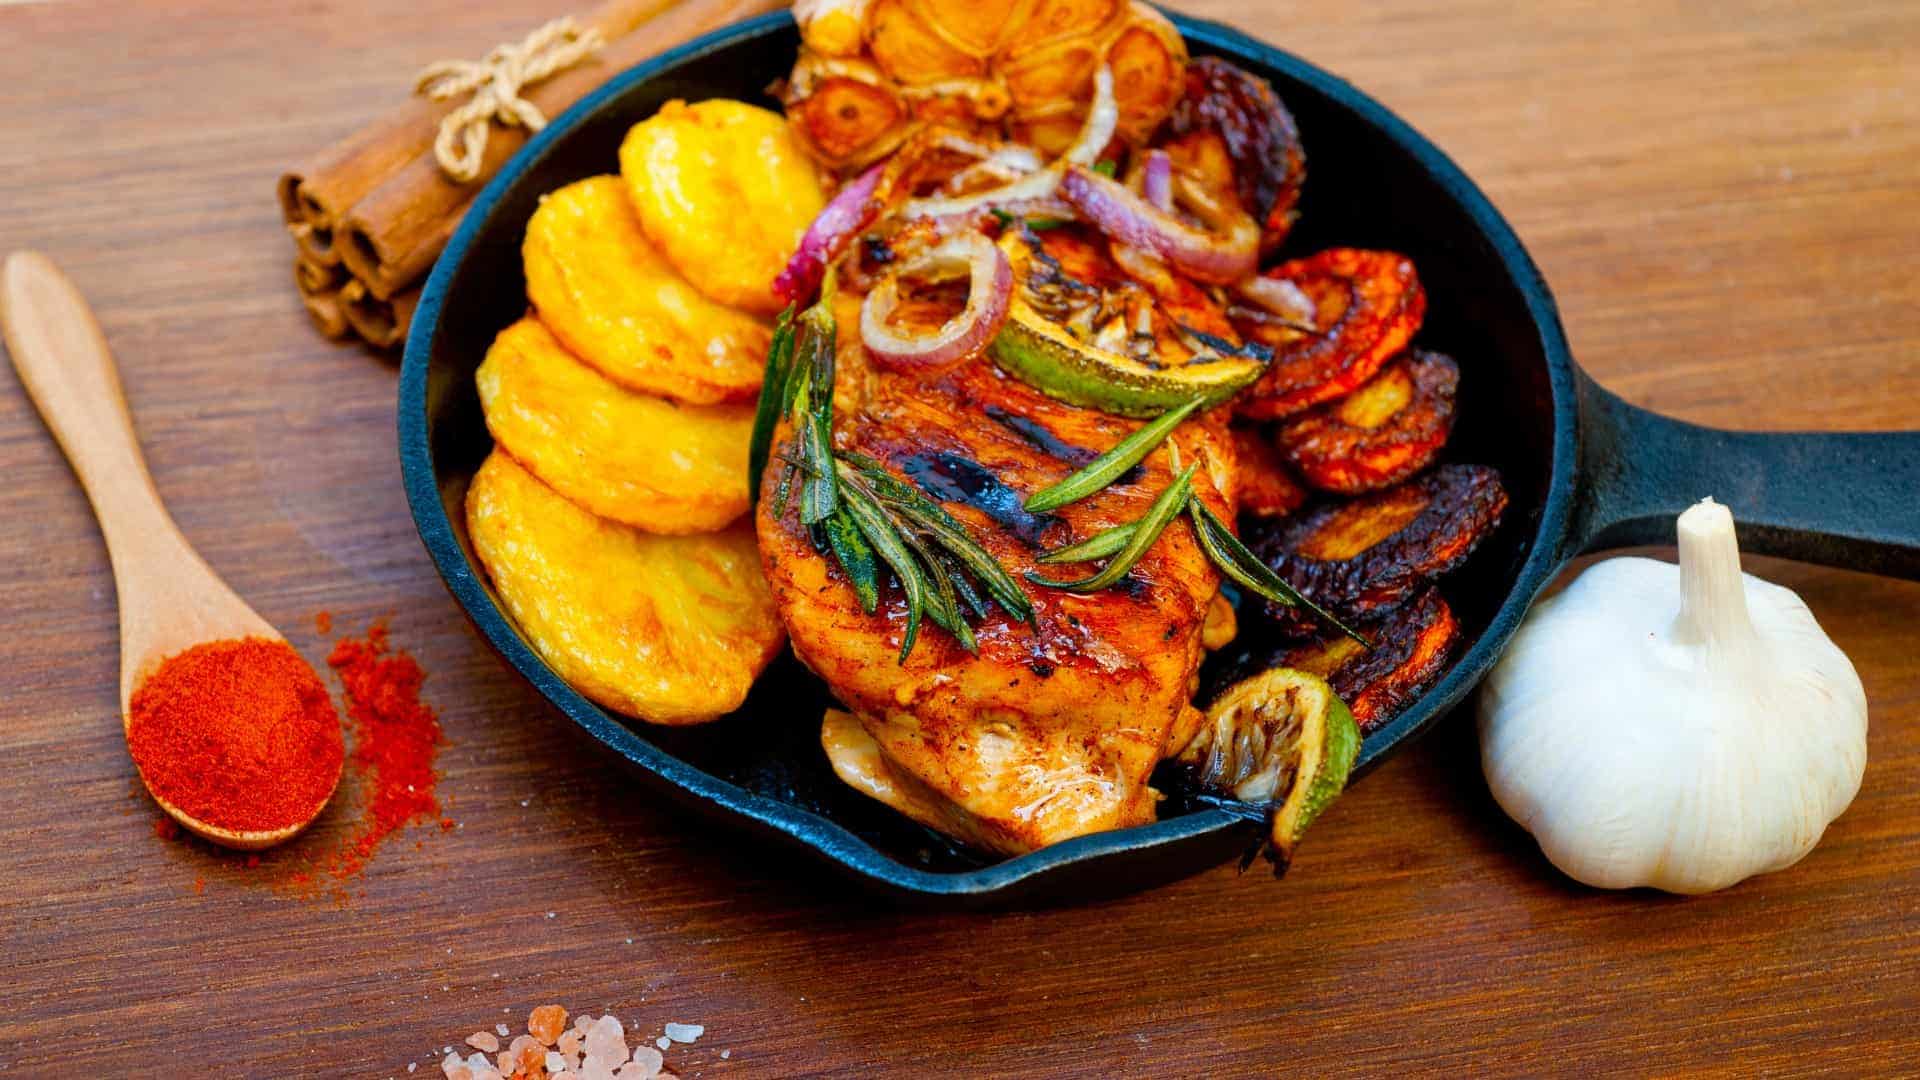 A vibrant cast-iron skillet filled with a juicy, grilled chicken breast, charred lime and red onion slices, and rosemary sprigs, accompanied by a side of golden fried plantains. The skillet is presented on a wooden table alongside a head of garlic, a spoonful of red ground spices, a pile of salt crystals, and cinnamon sticks.